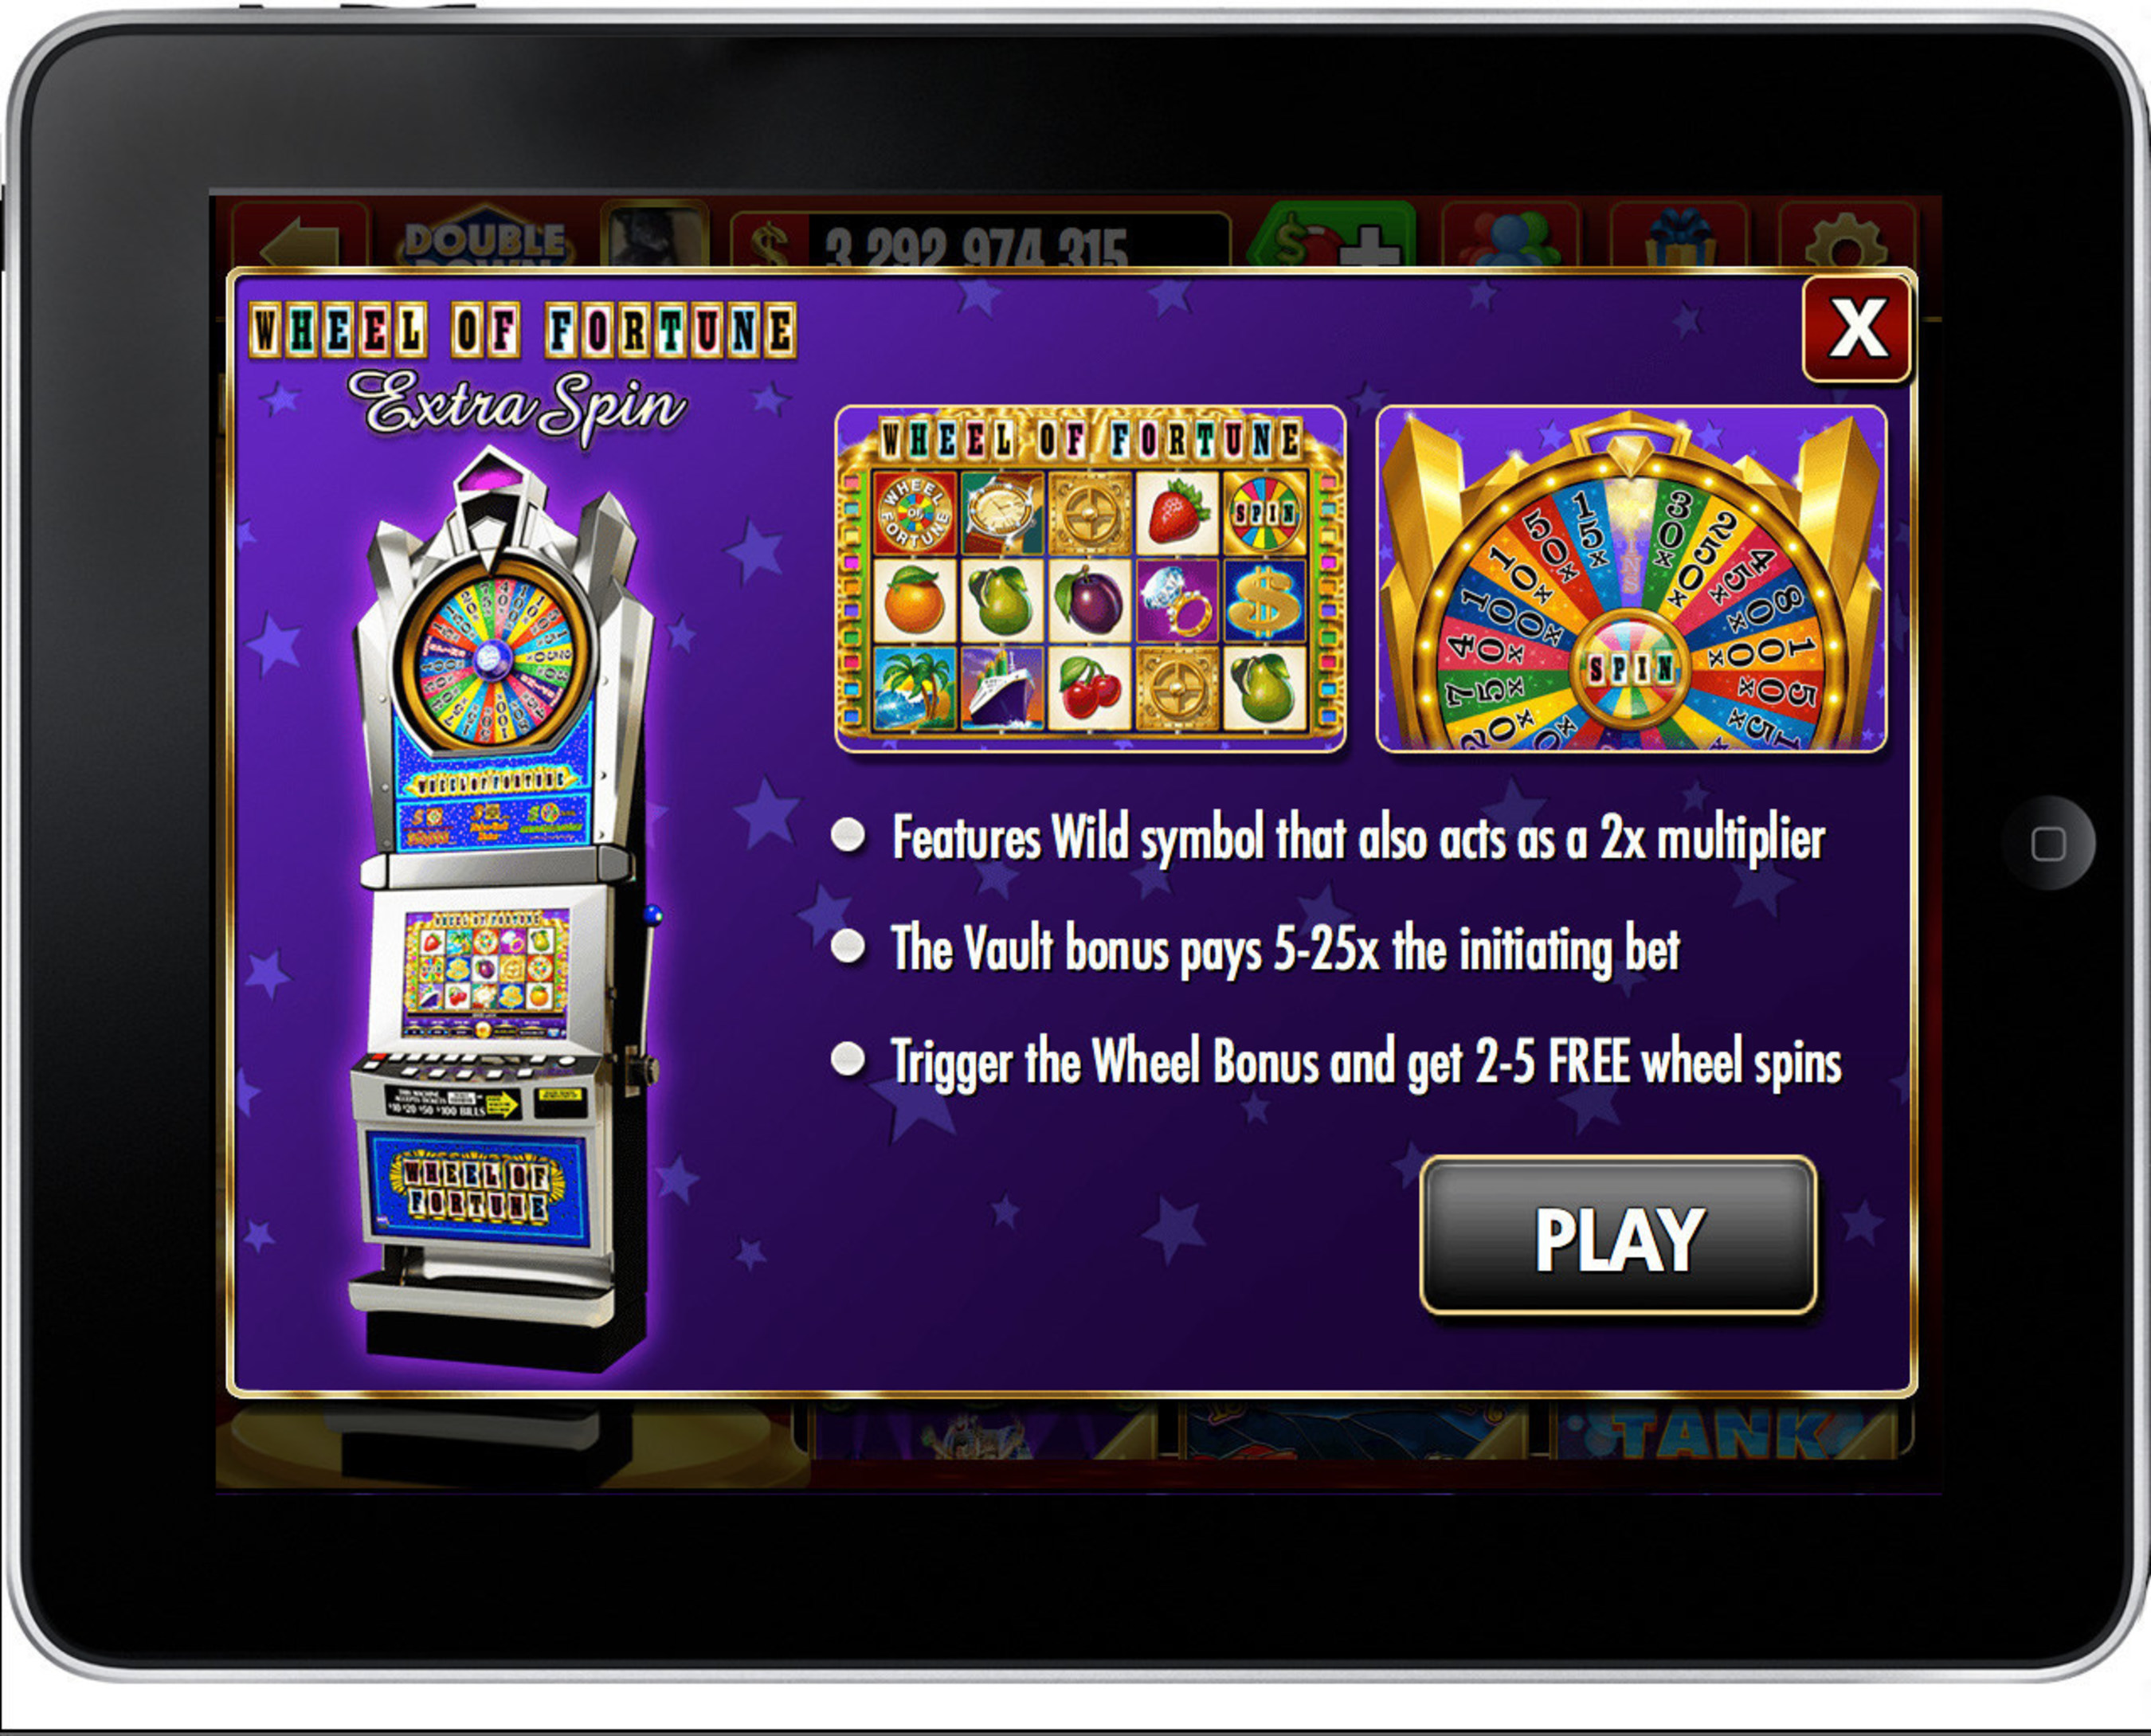 IGT's DoubleDown Casino Doubles Bonus Excitement with Wheel of Fortune Extra Spin.